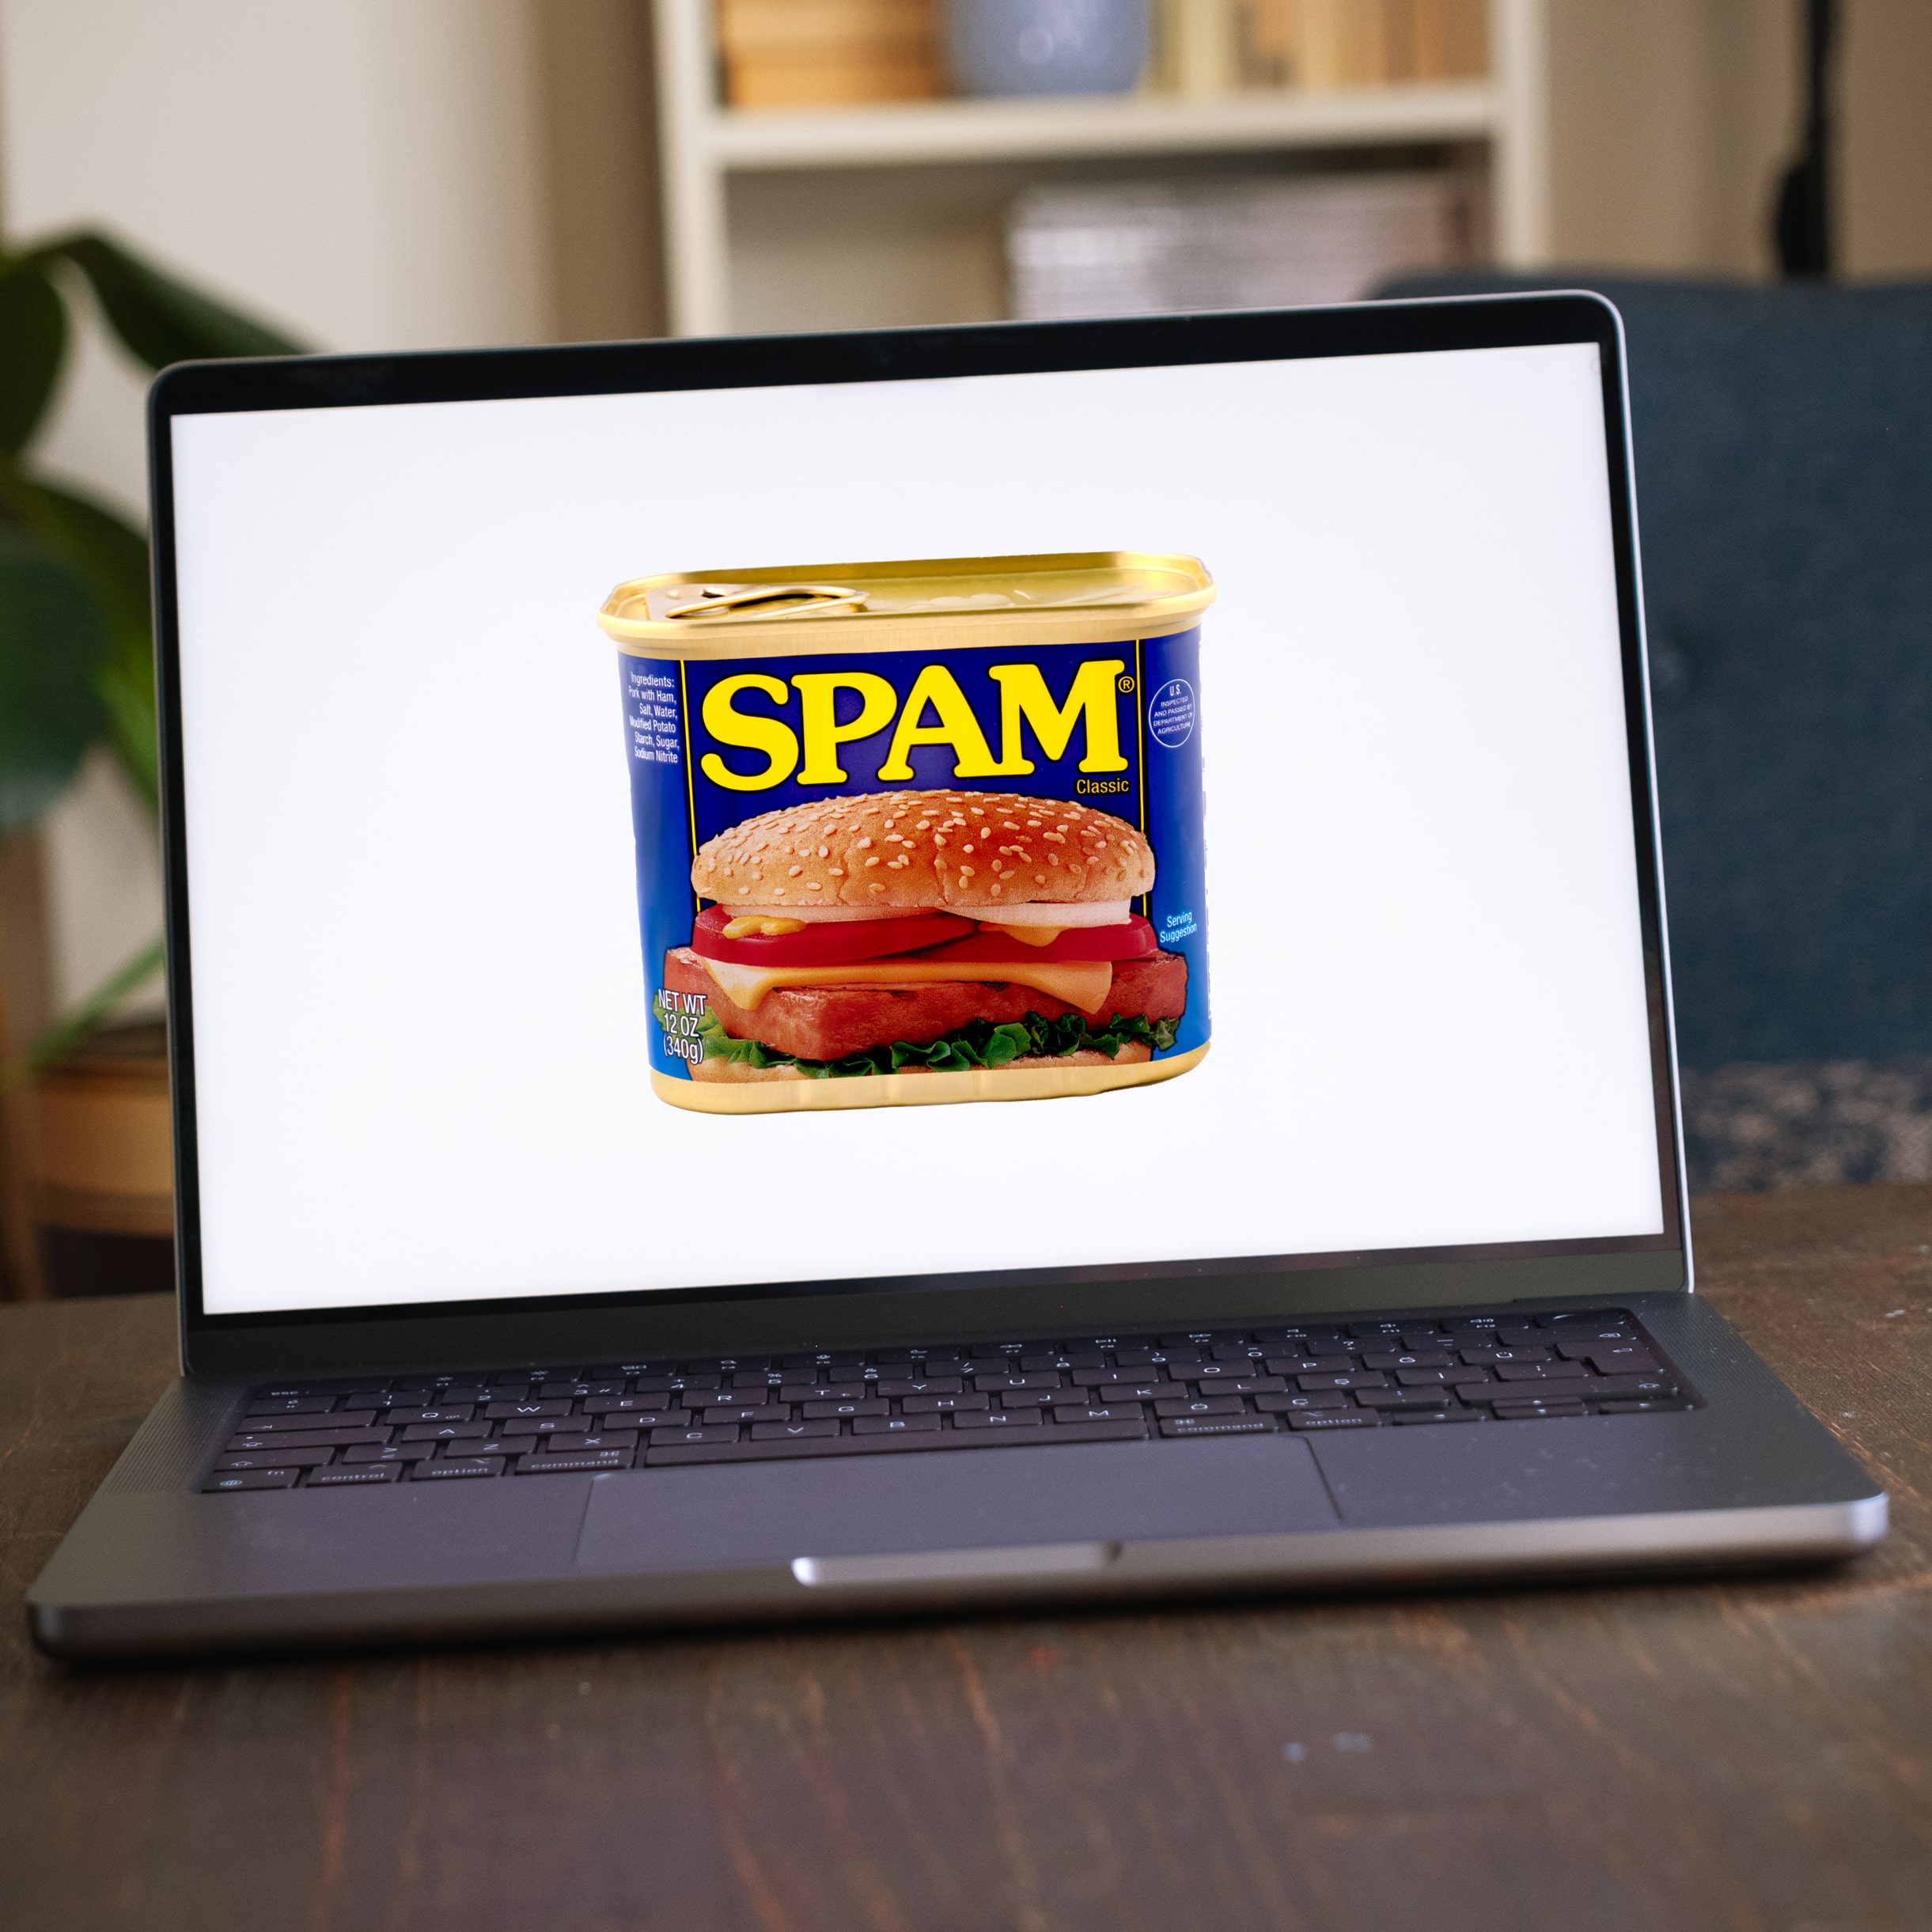 Have you had your SPAM today?